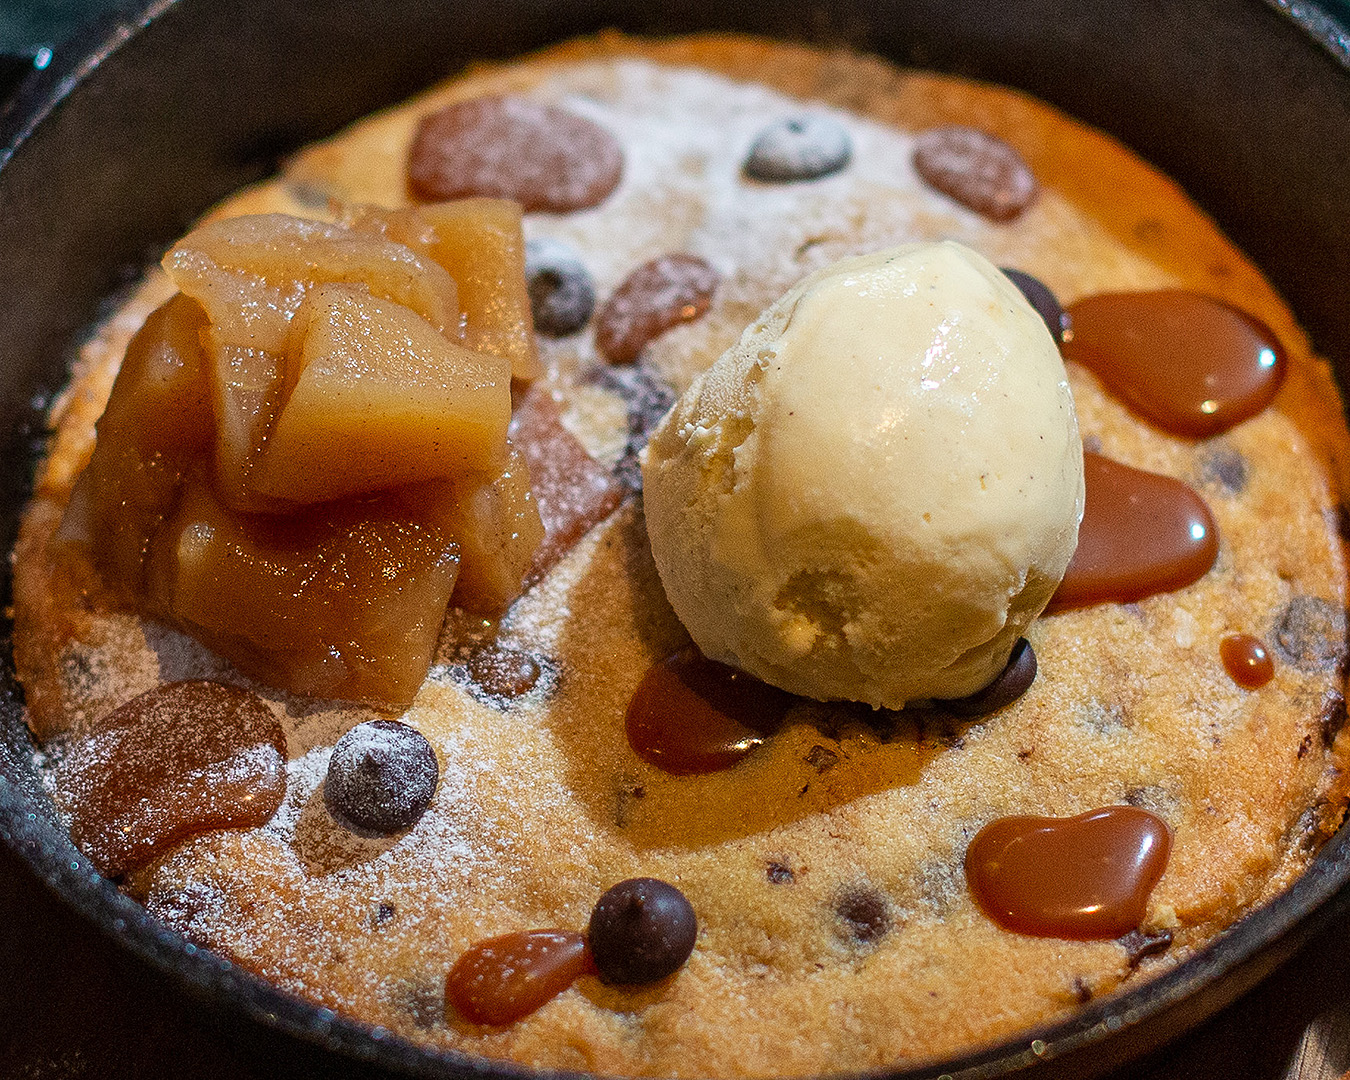 The moreish skillet cookie.